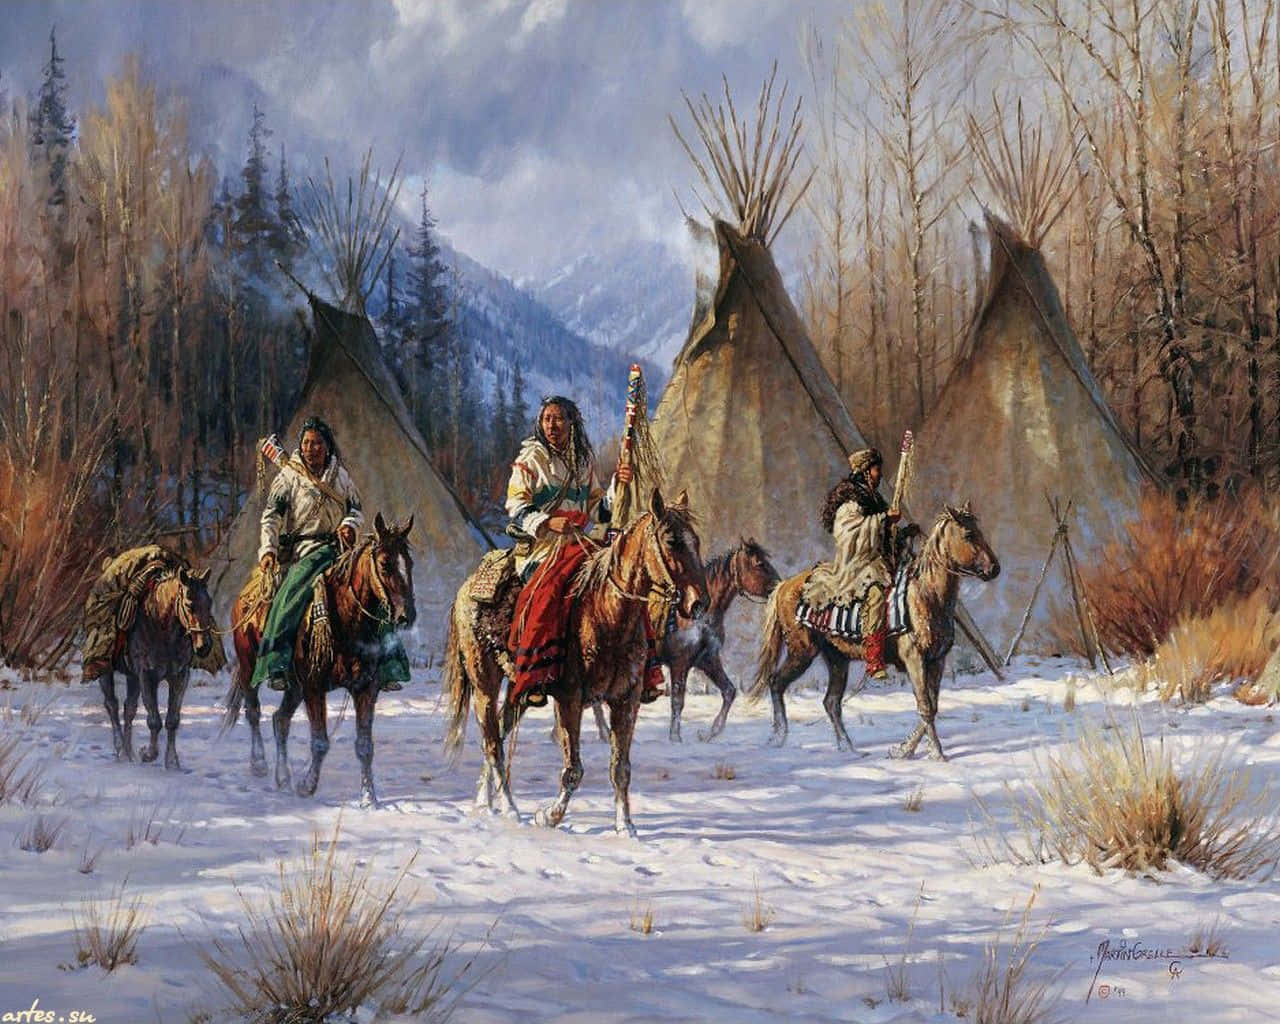 A Painting Of Native Americans Riding Horses Through The Snow